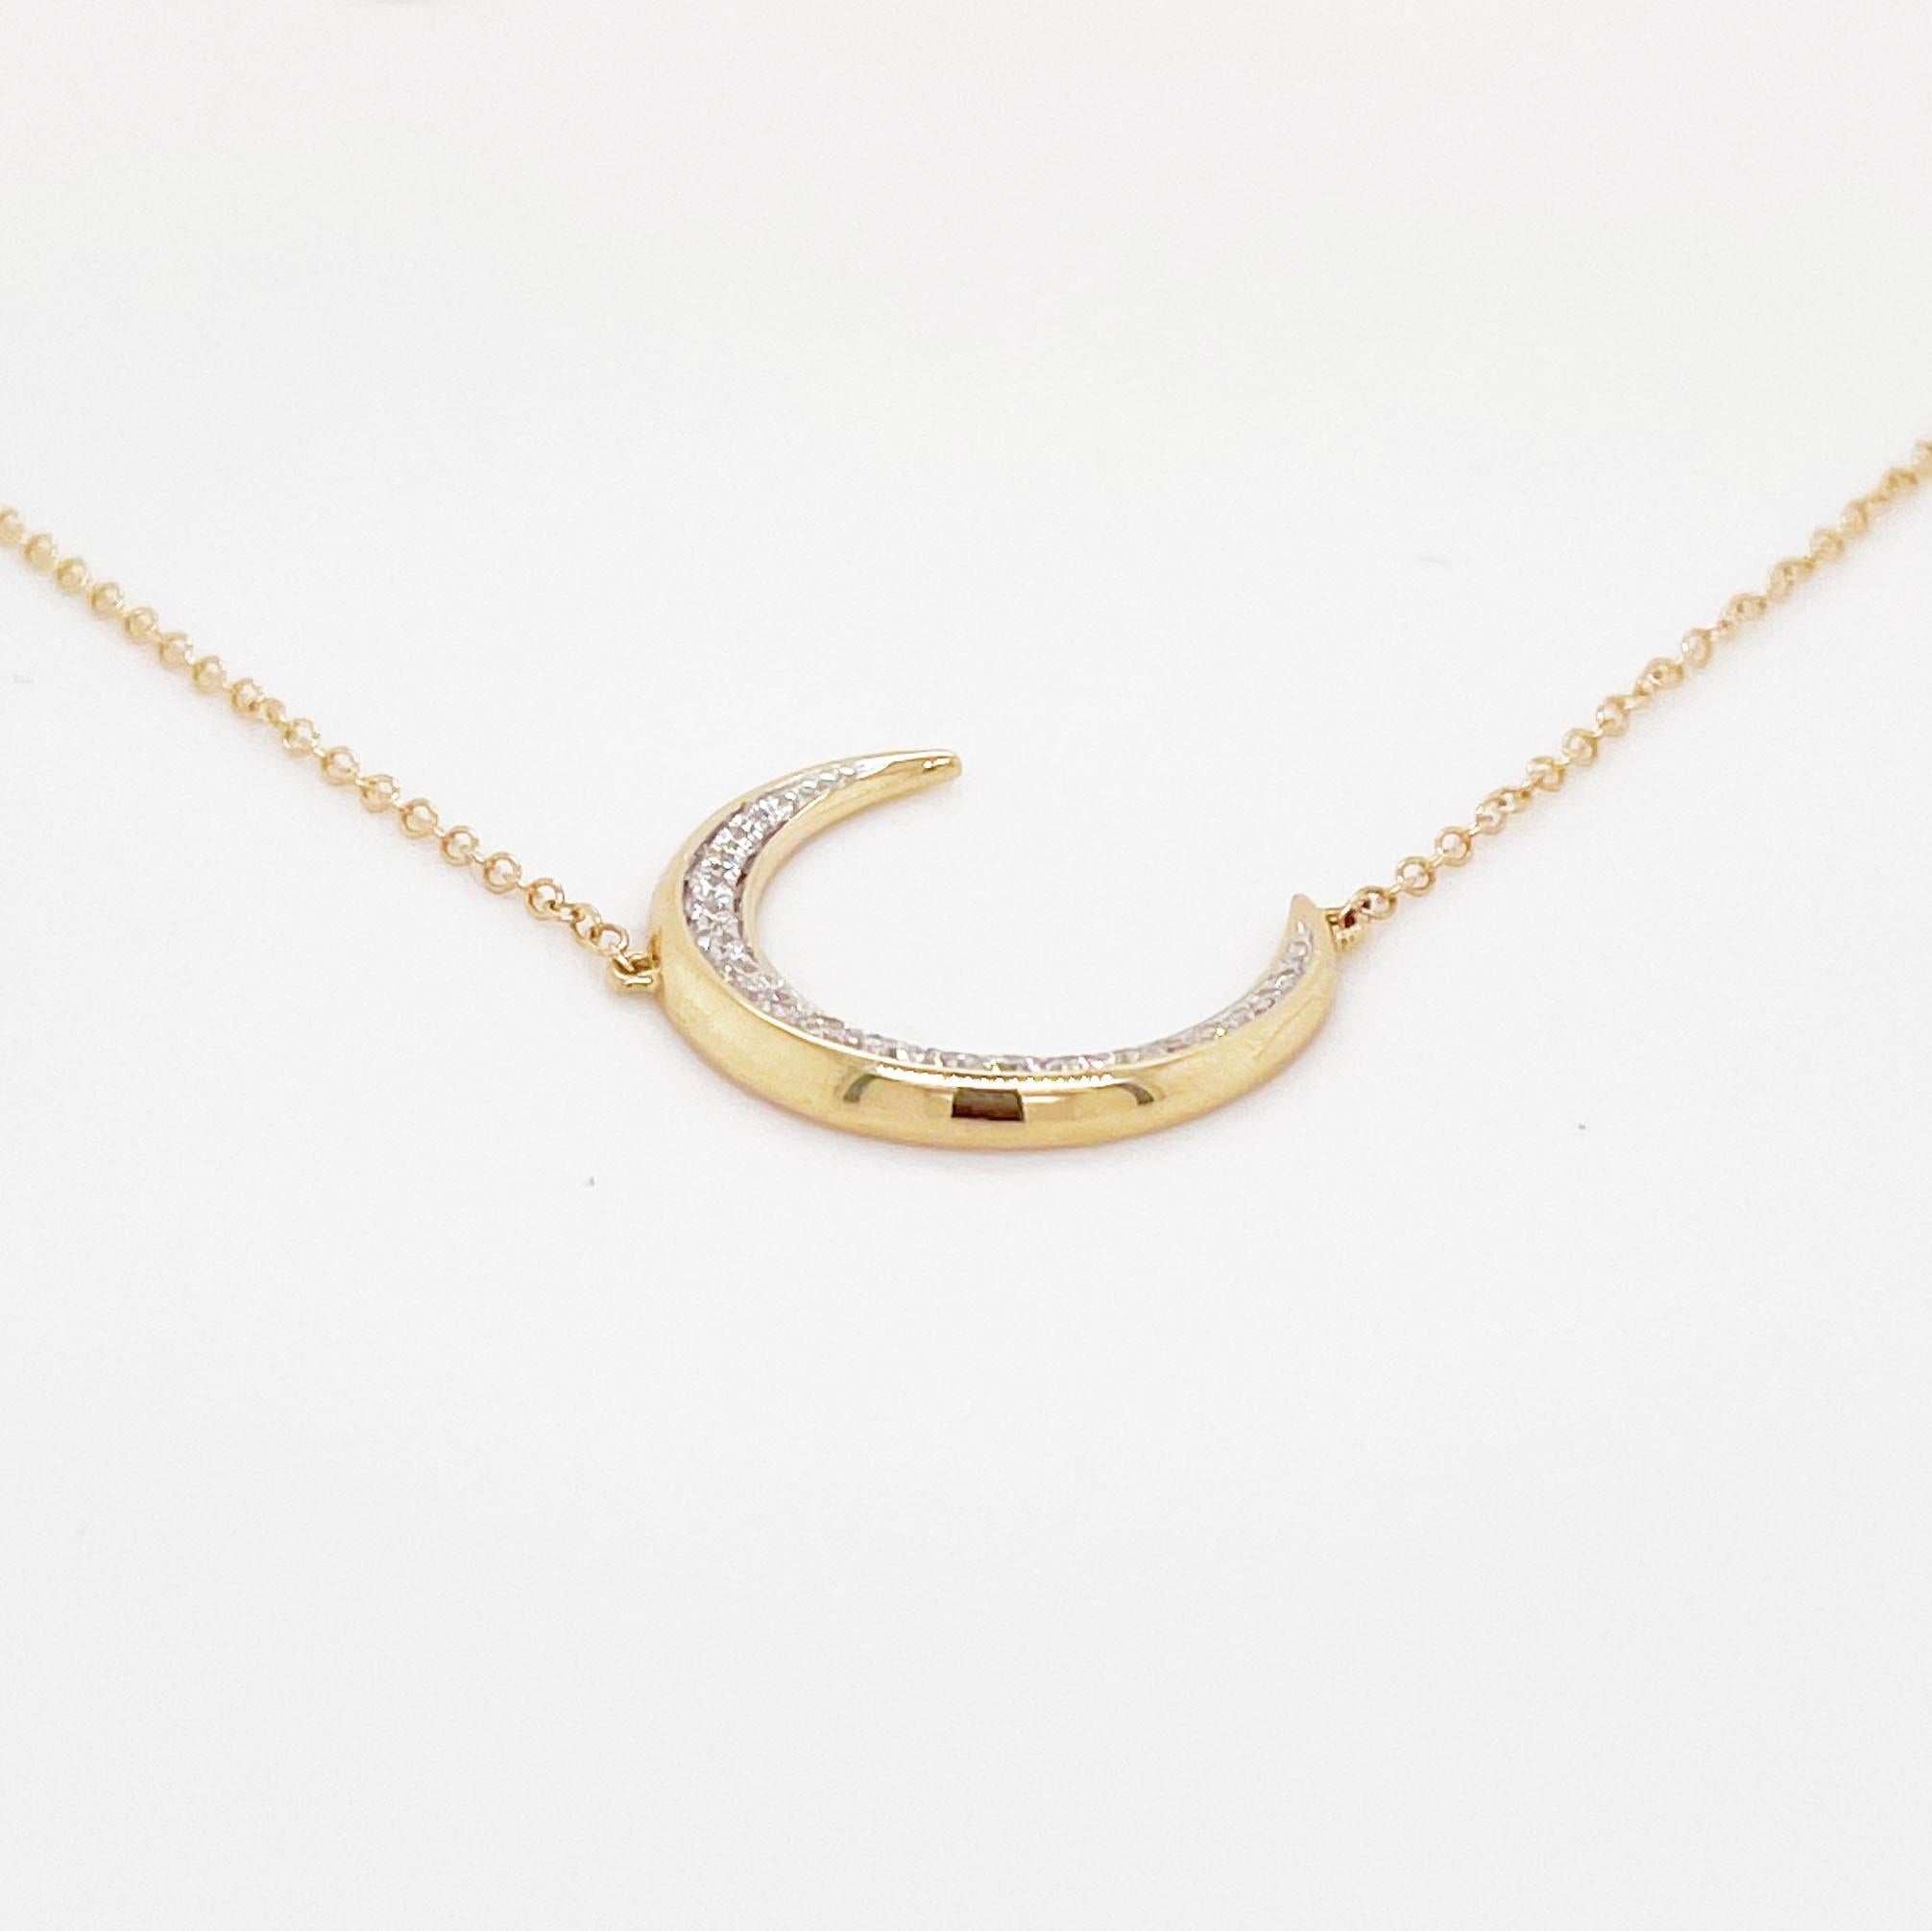 This diamond crescent moon necklace will keep your stars all in alignment! The gorgeous details in the celestial moon design is perfect for someone that loves details. The details for this beautiful necklace are listed below:
Metal Quality: 14K